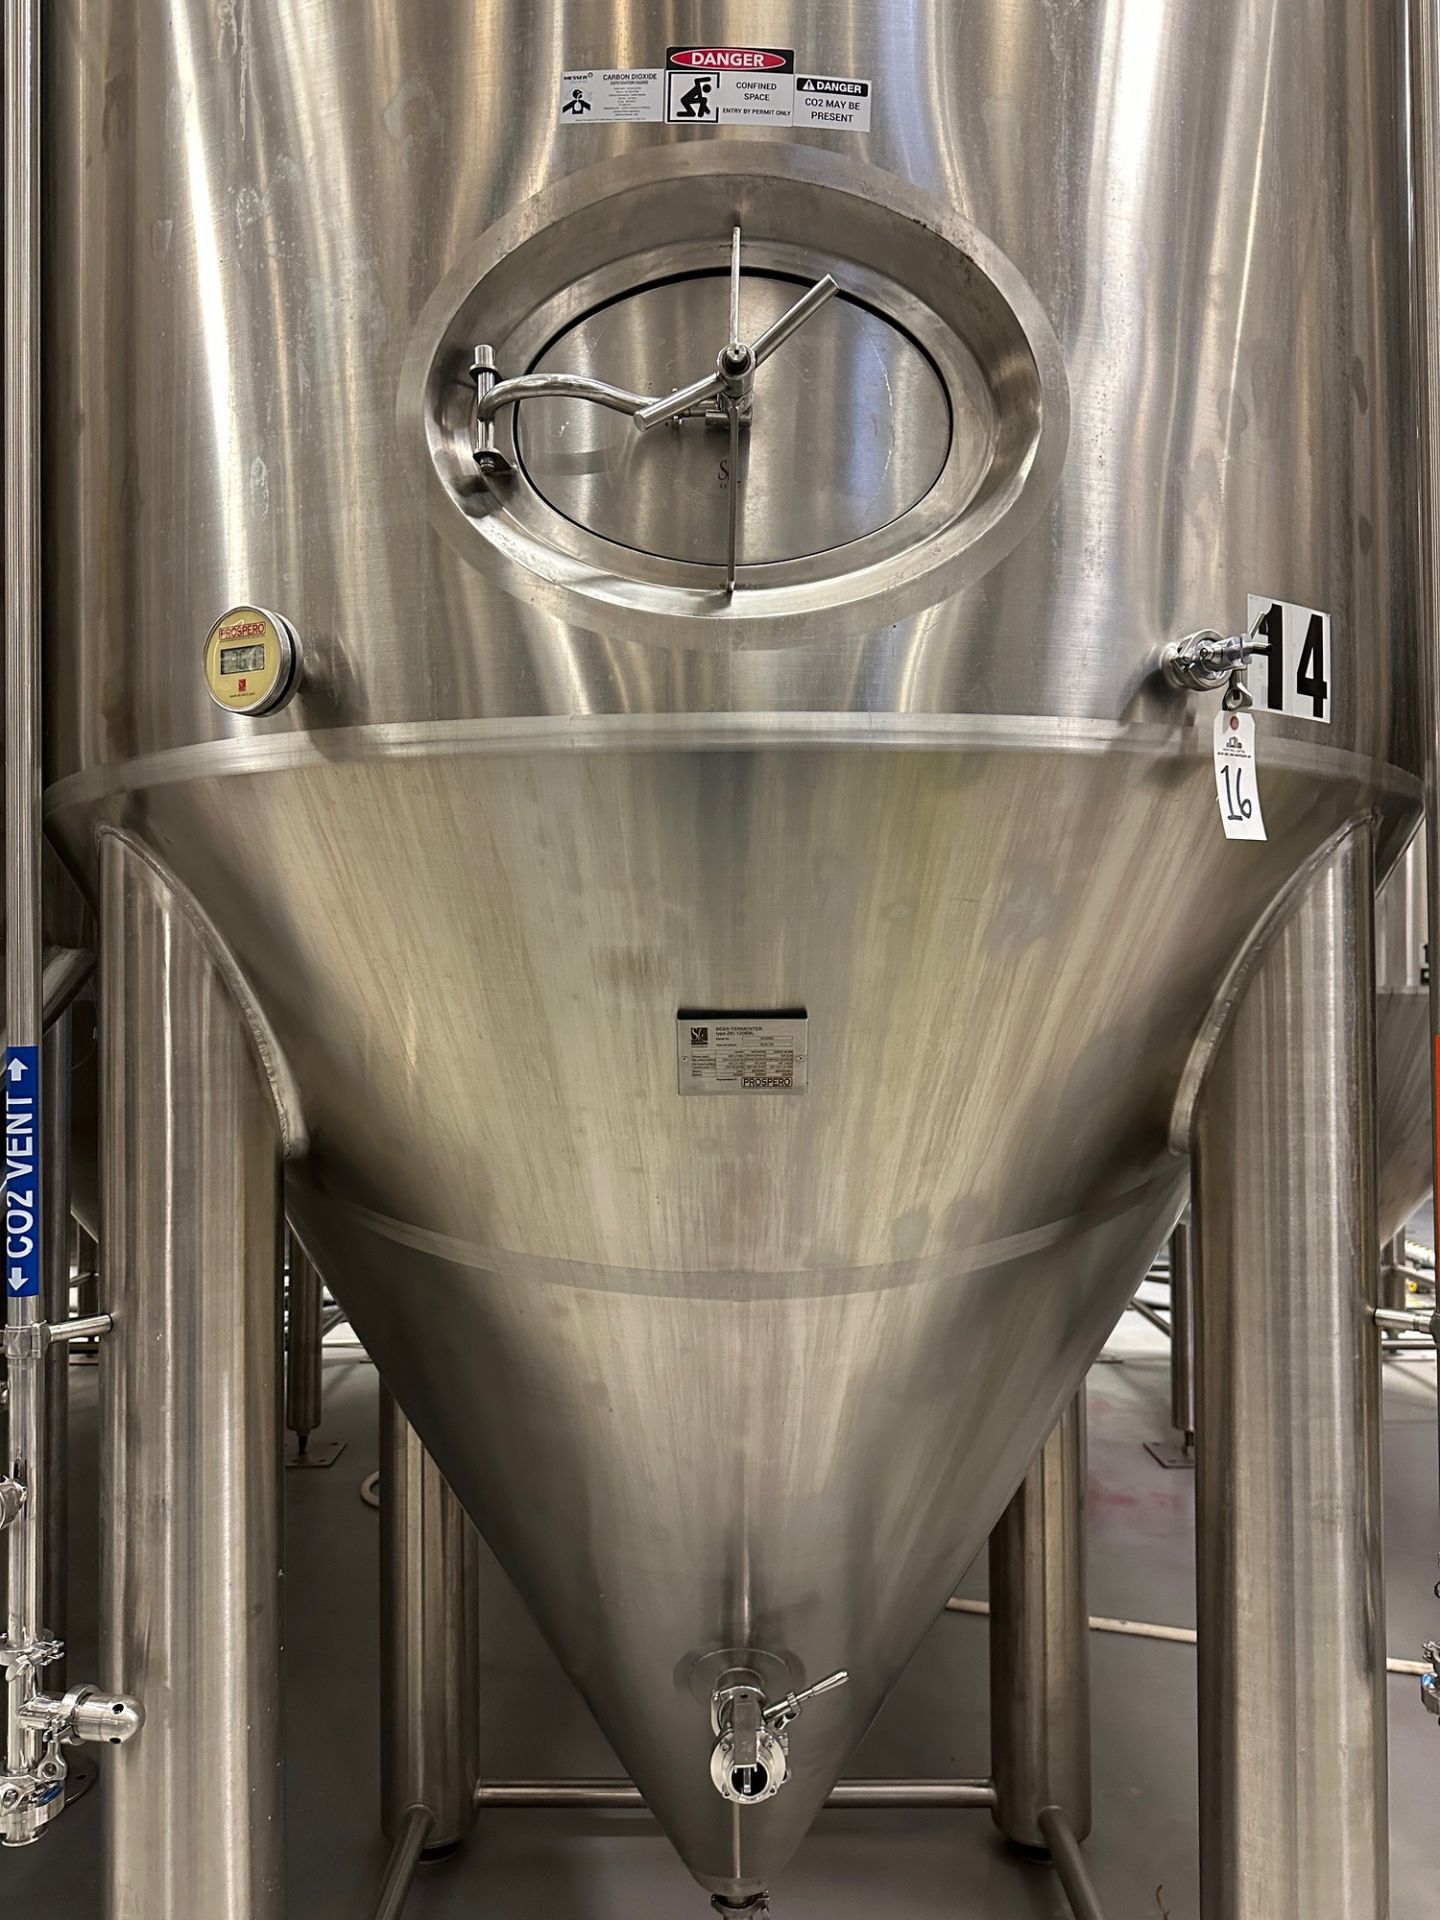 (1 of 8) 2018 Marks 132 BBL FV / 175 BBL or 5,400 Gal Max Capacity Jacketed Stainless Steel Ferm - Image 2 of 5